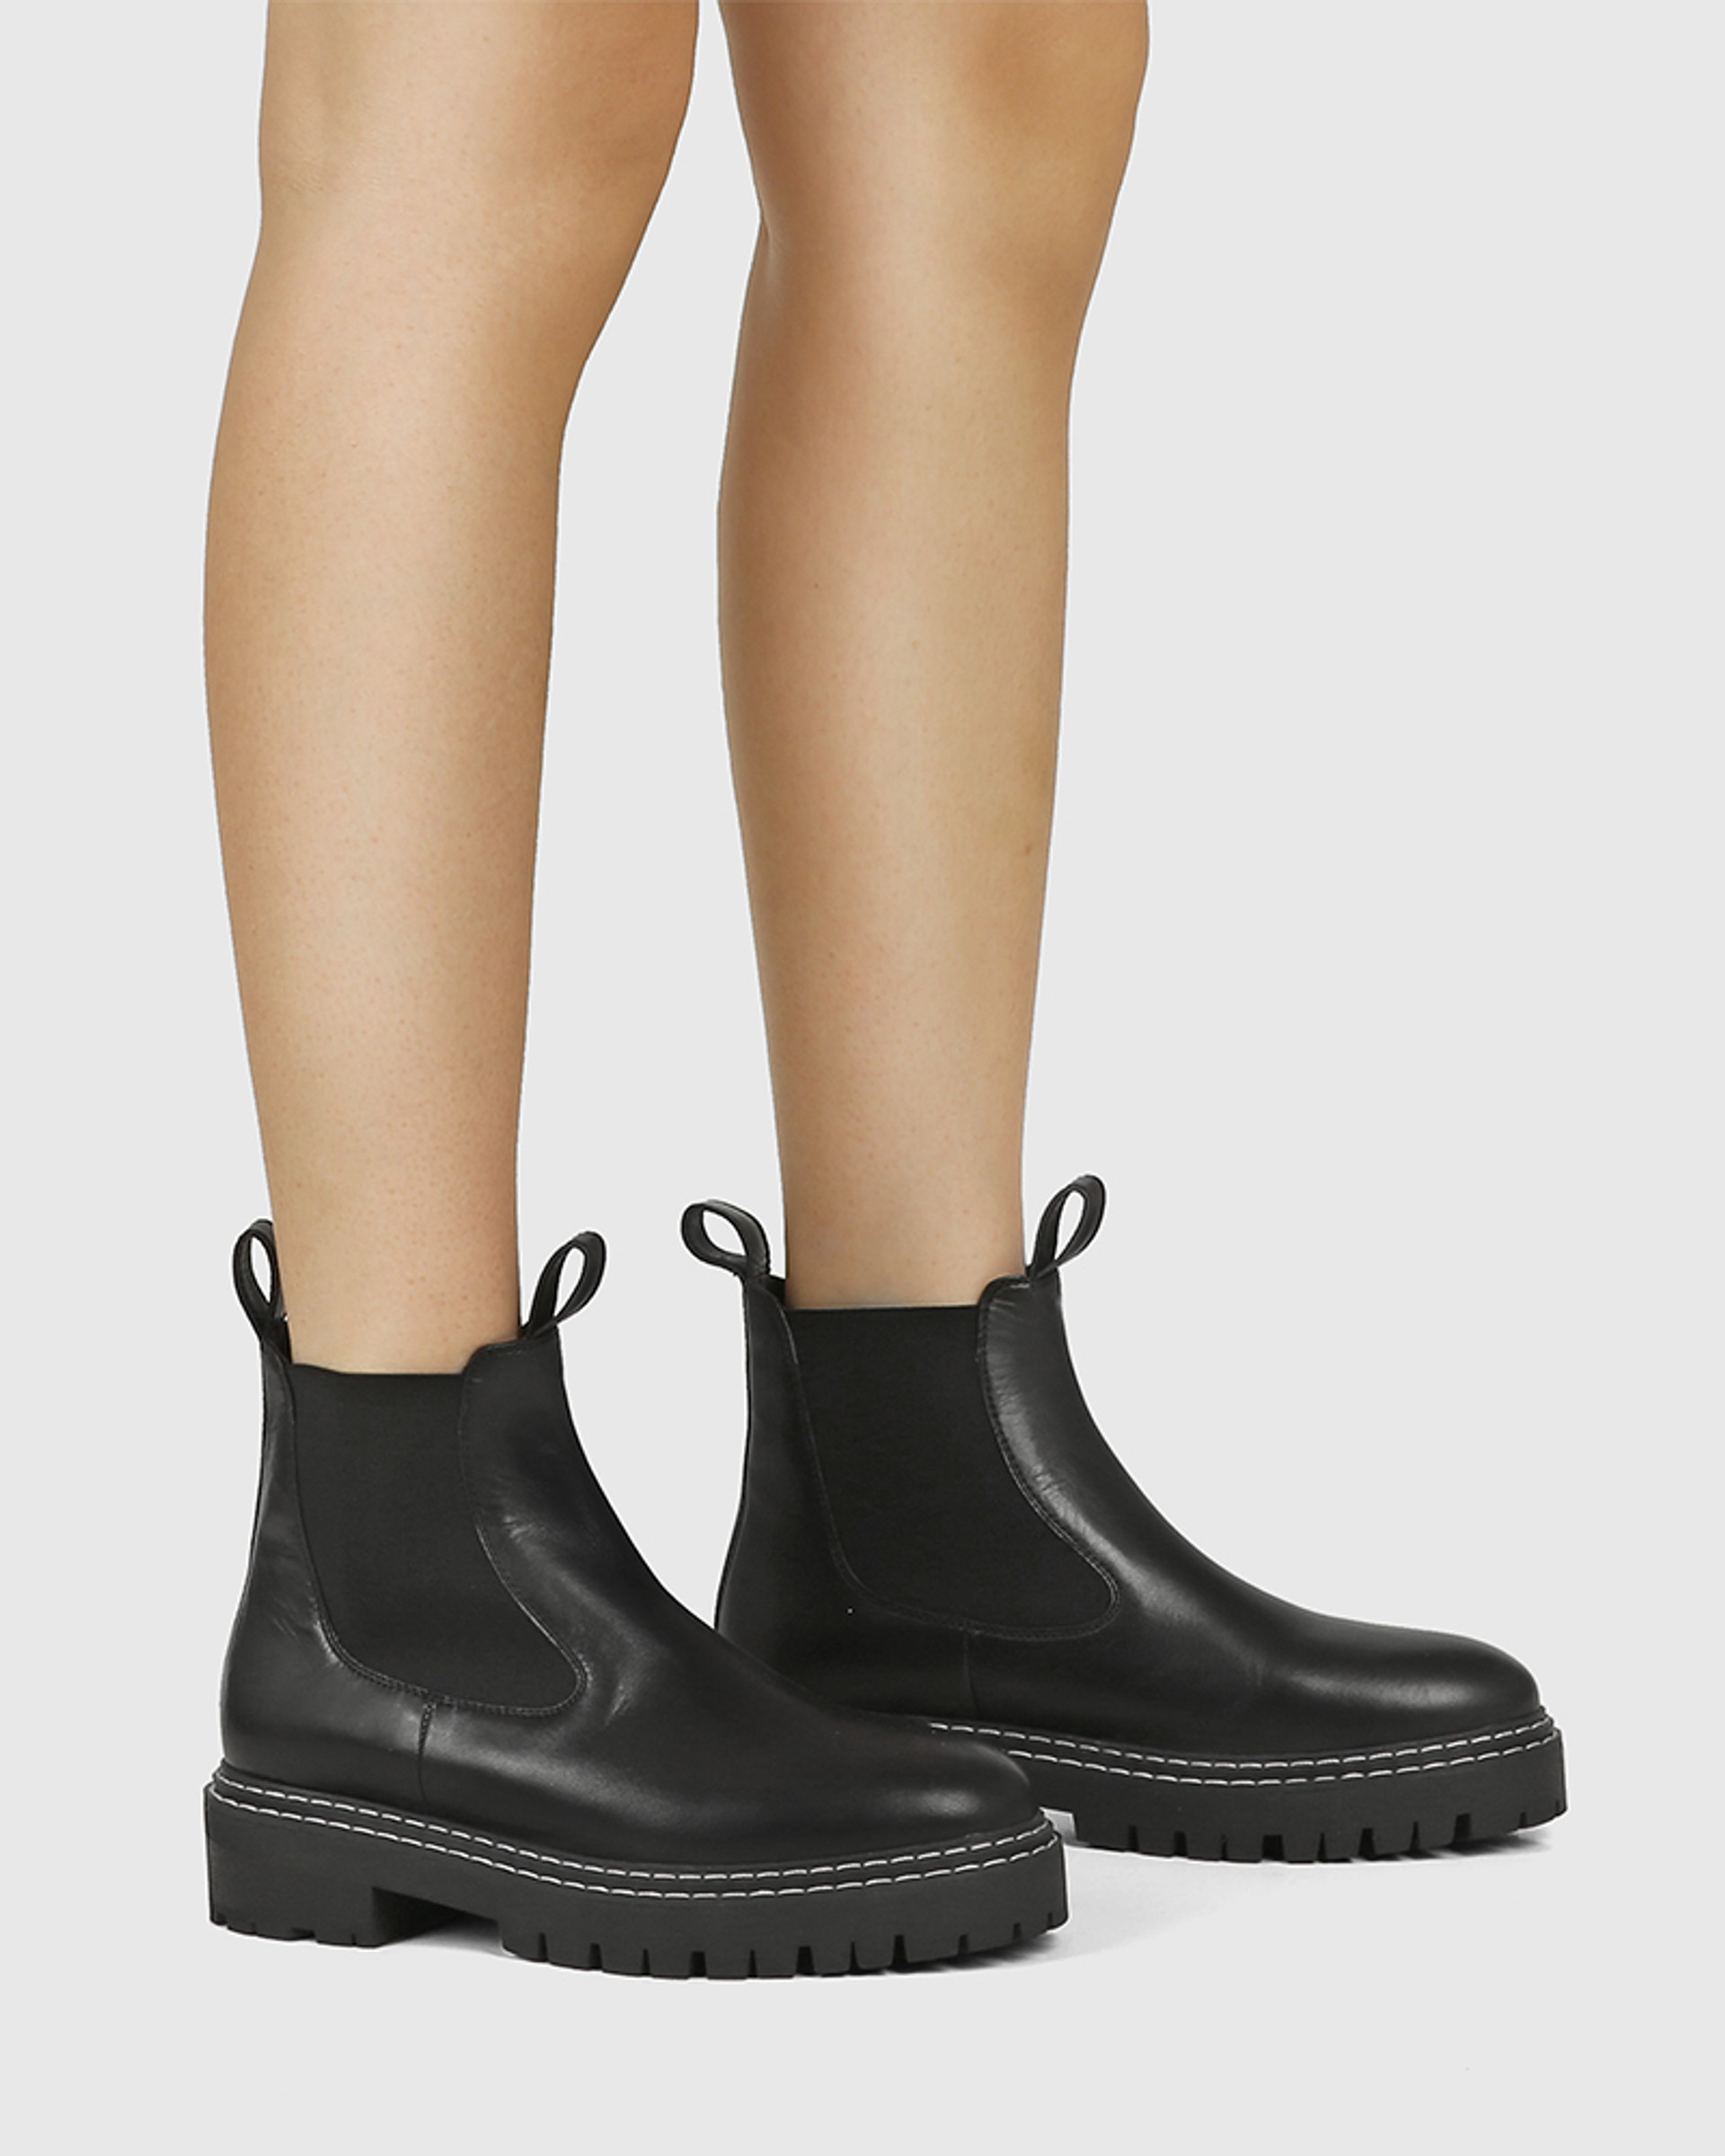 Madi Black Leather Rubber Sole Ankle Boot